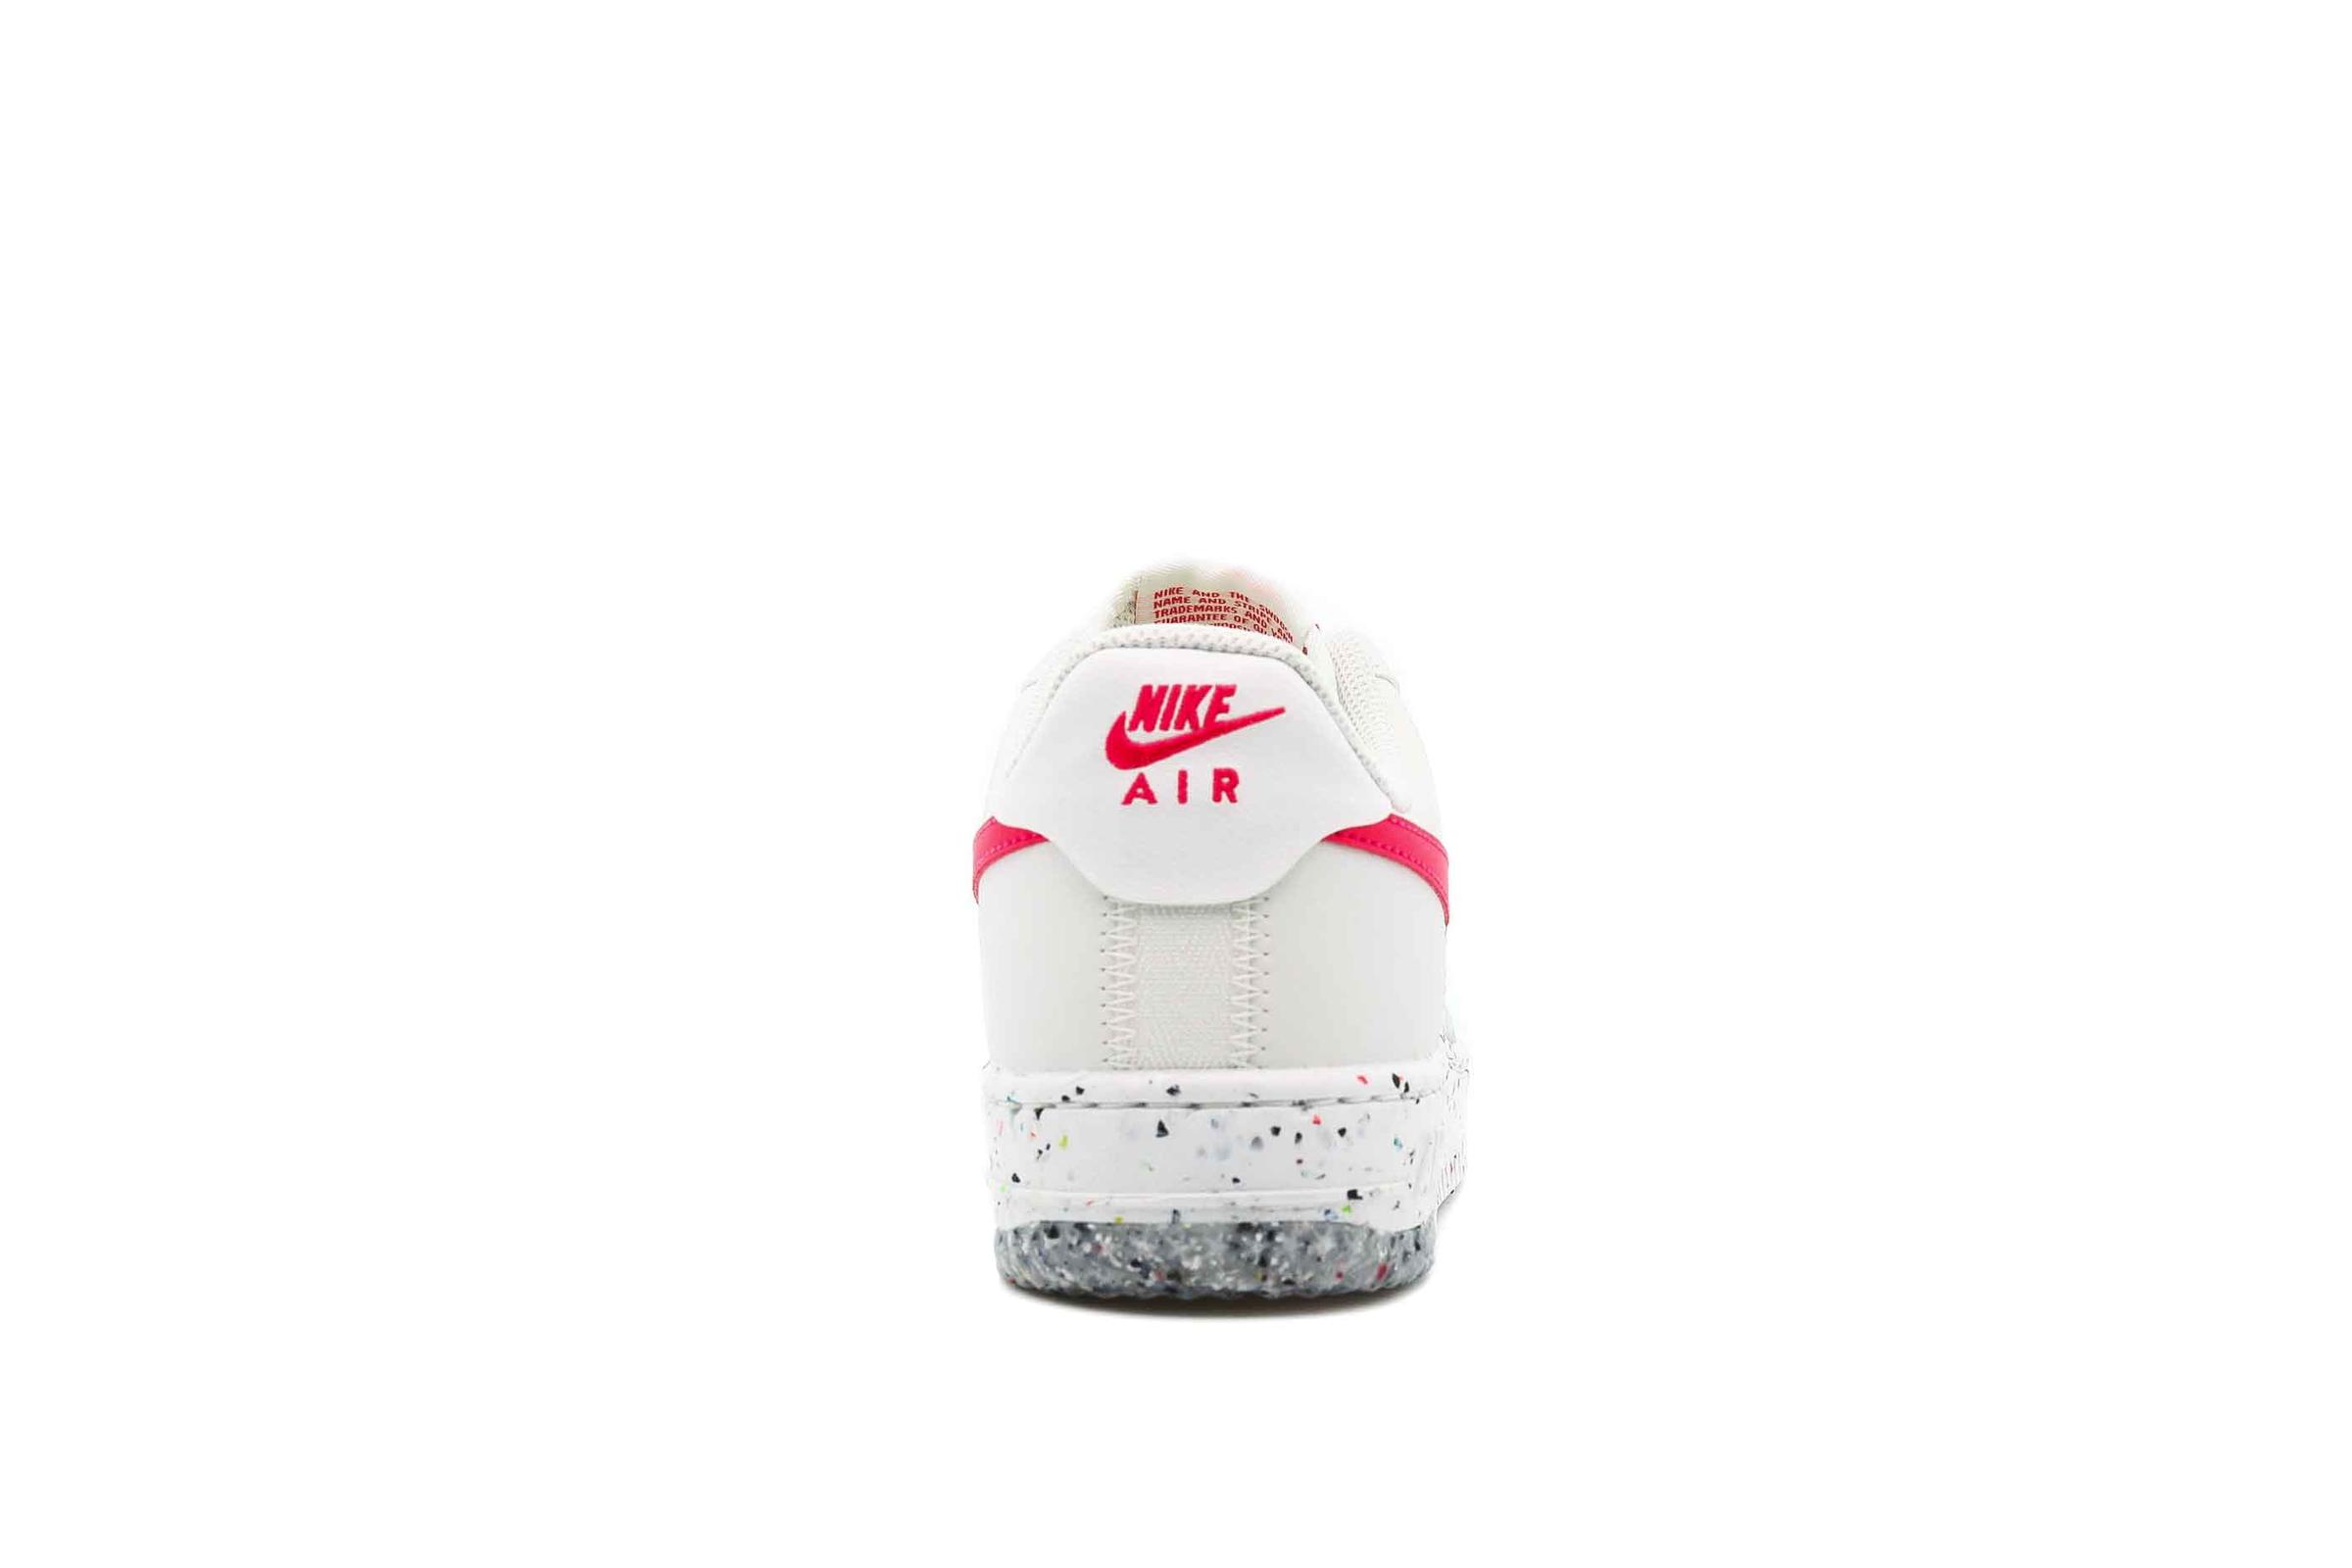 Nike WMNS AIR FORCE 1 CRATER "SUMMIT WHITE"